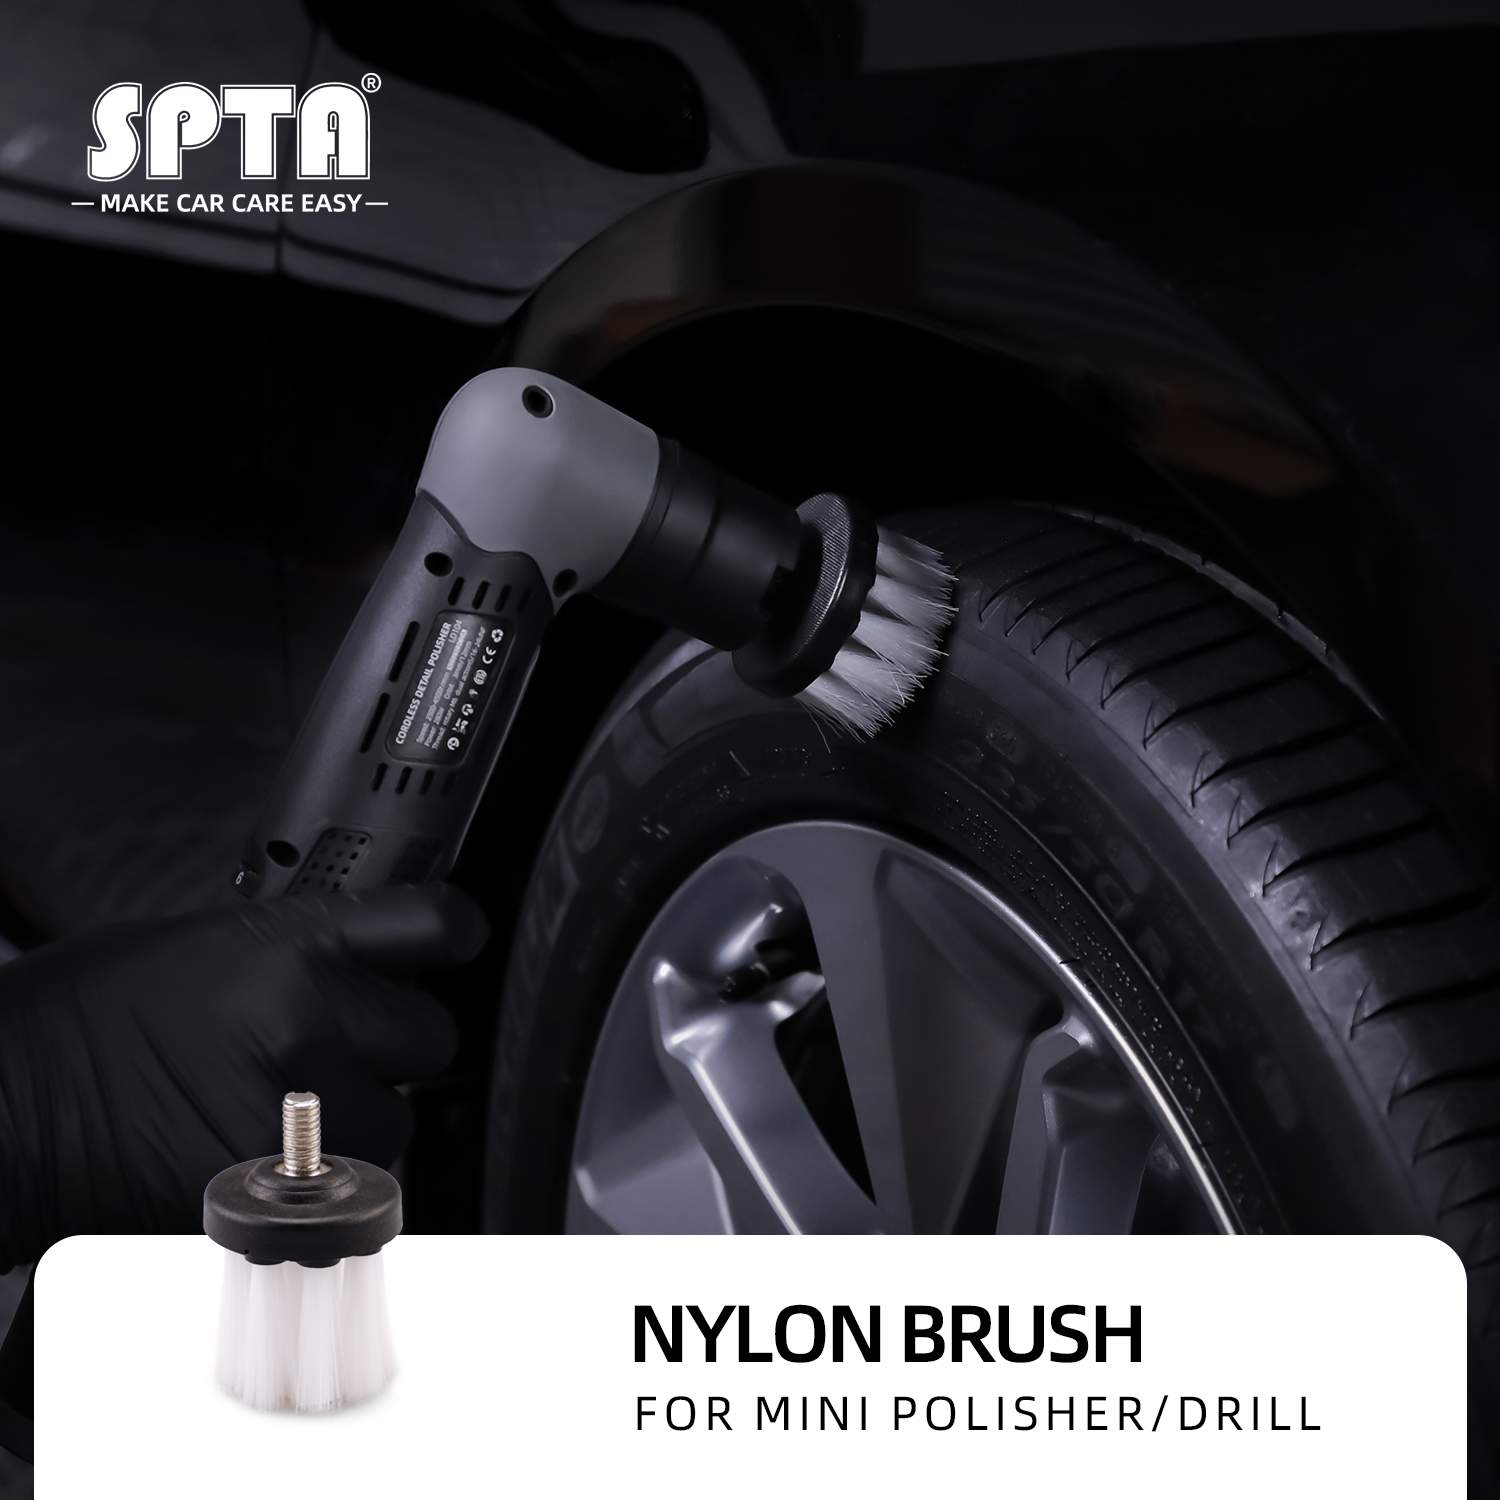 SPTA Electric Drill Brush Multi-function Cleaning Brush Head Suitable For DA Polisher and 12V Cordless Polisher